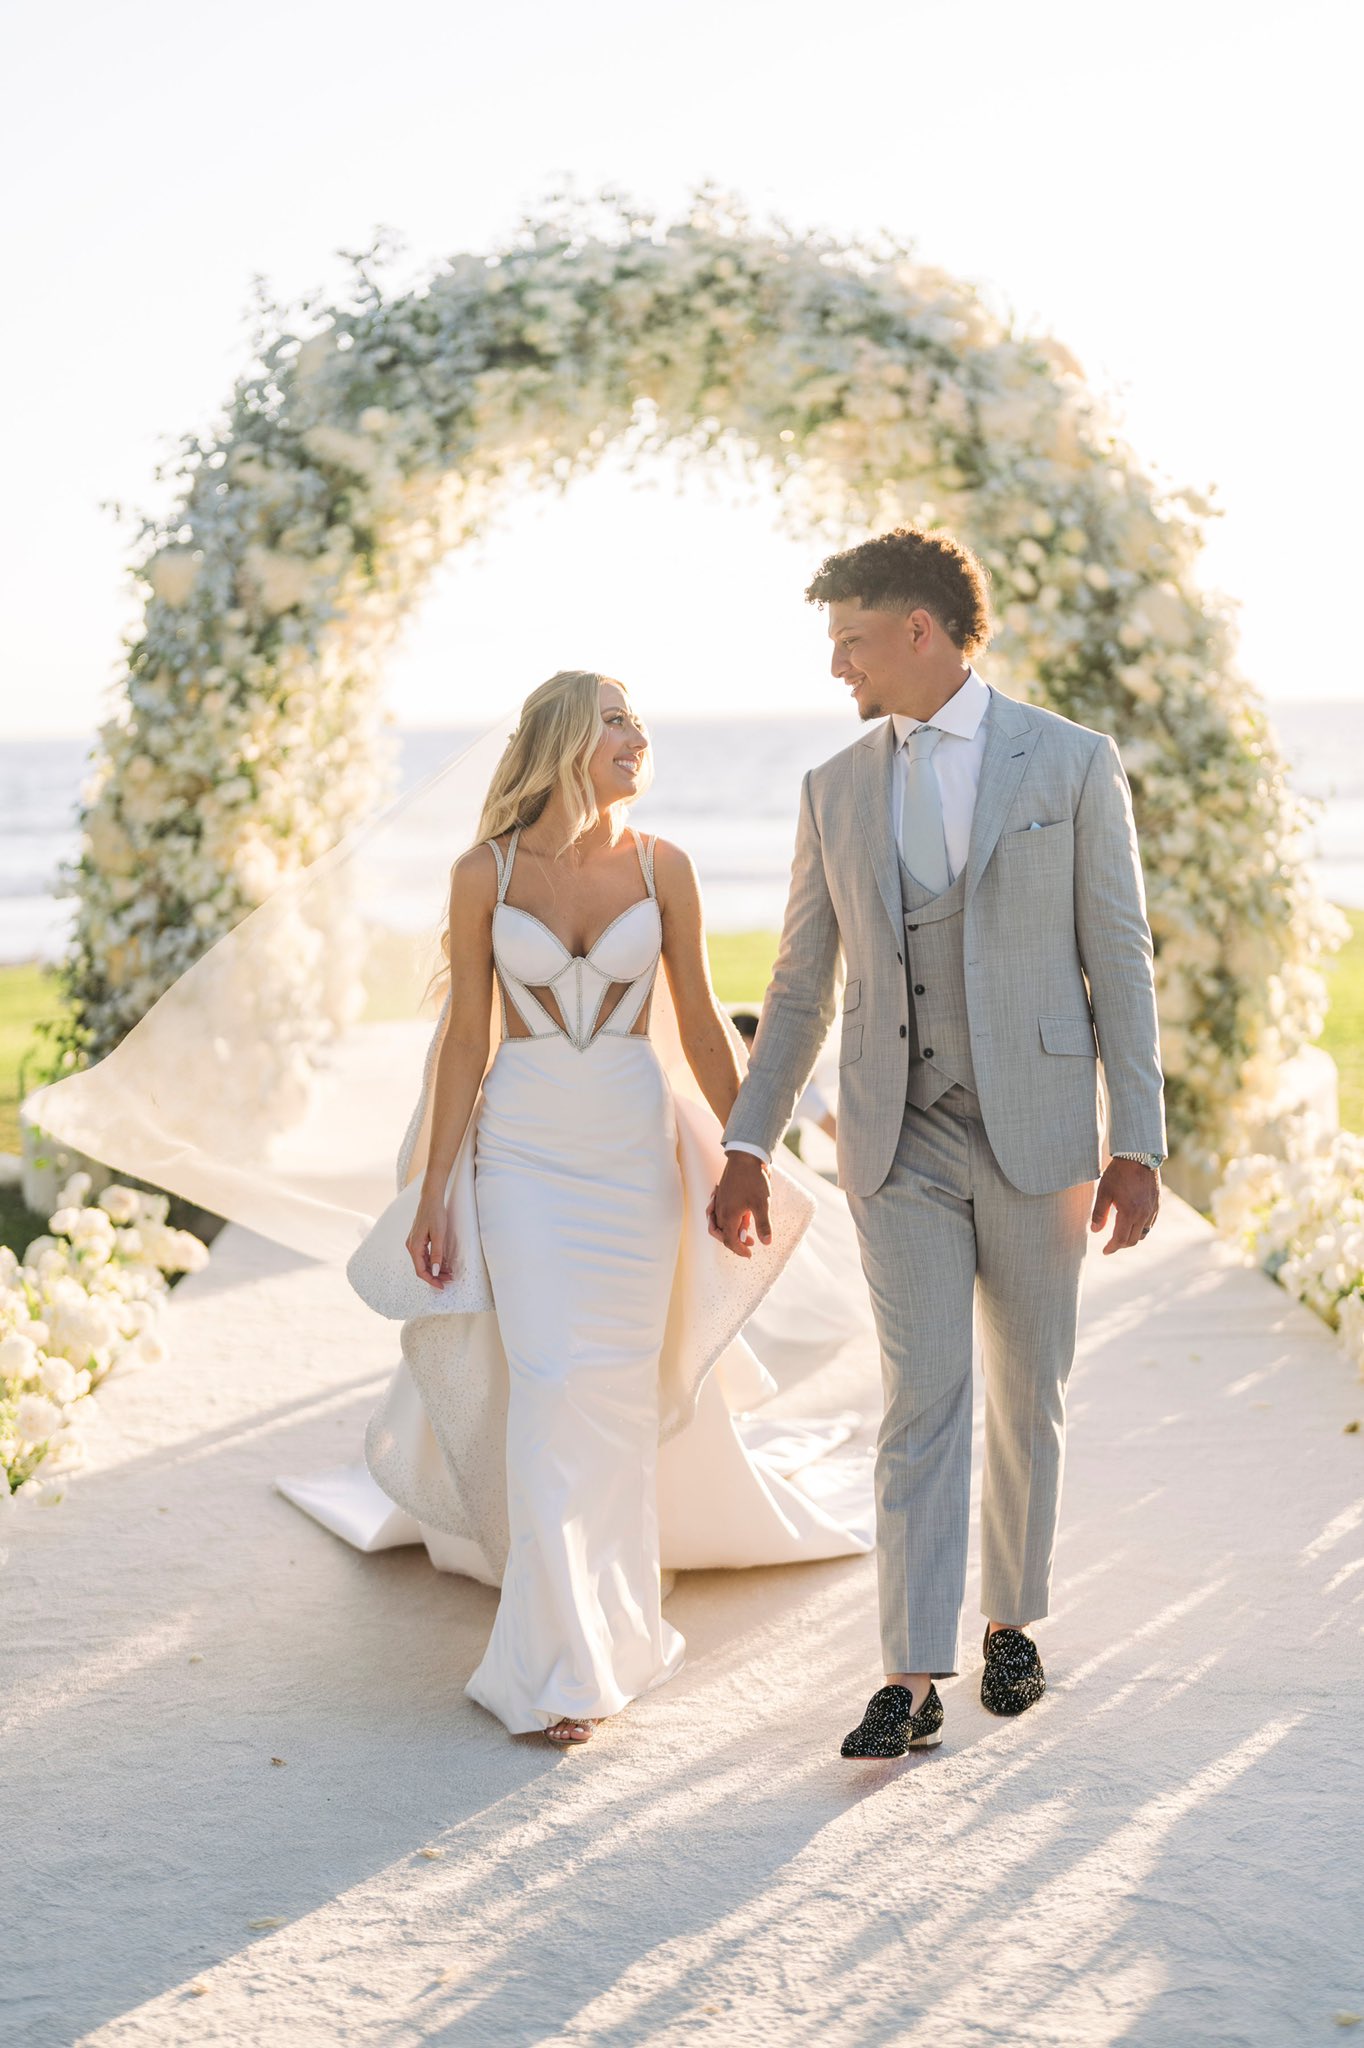 Patrick Mahomes and Brittany Matthews' potential wedding date